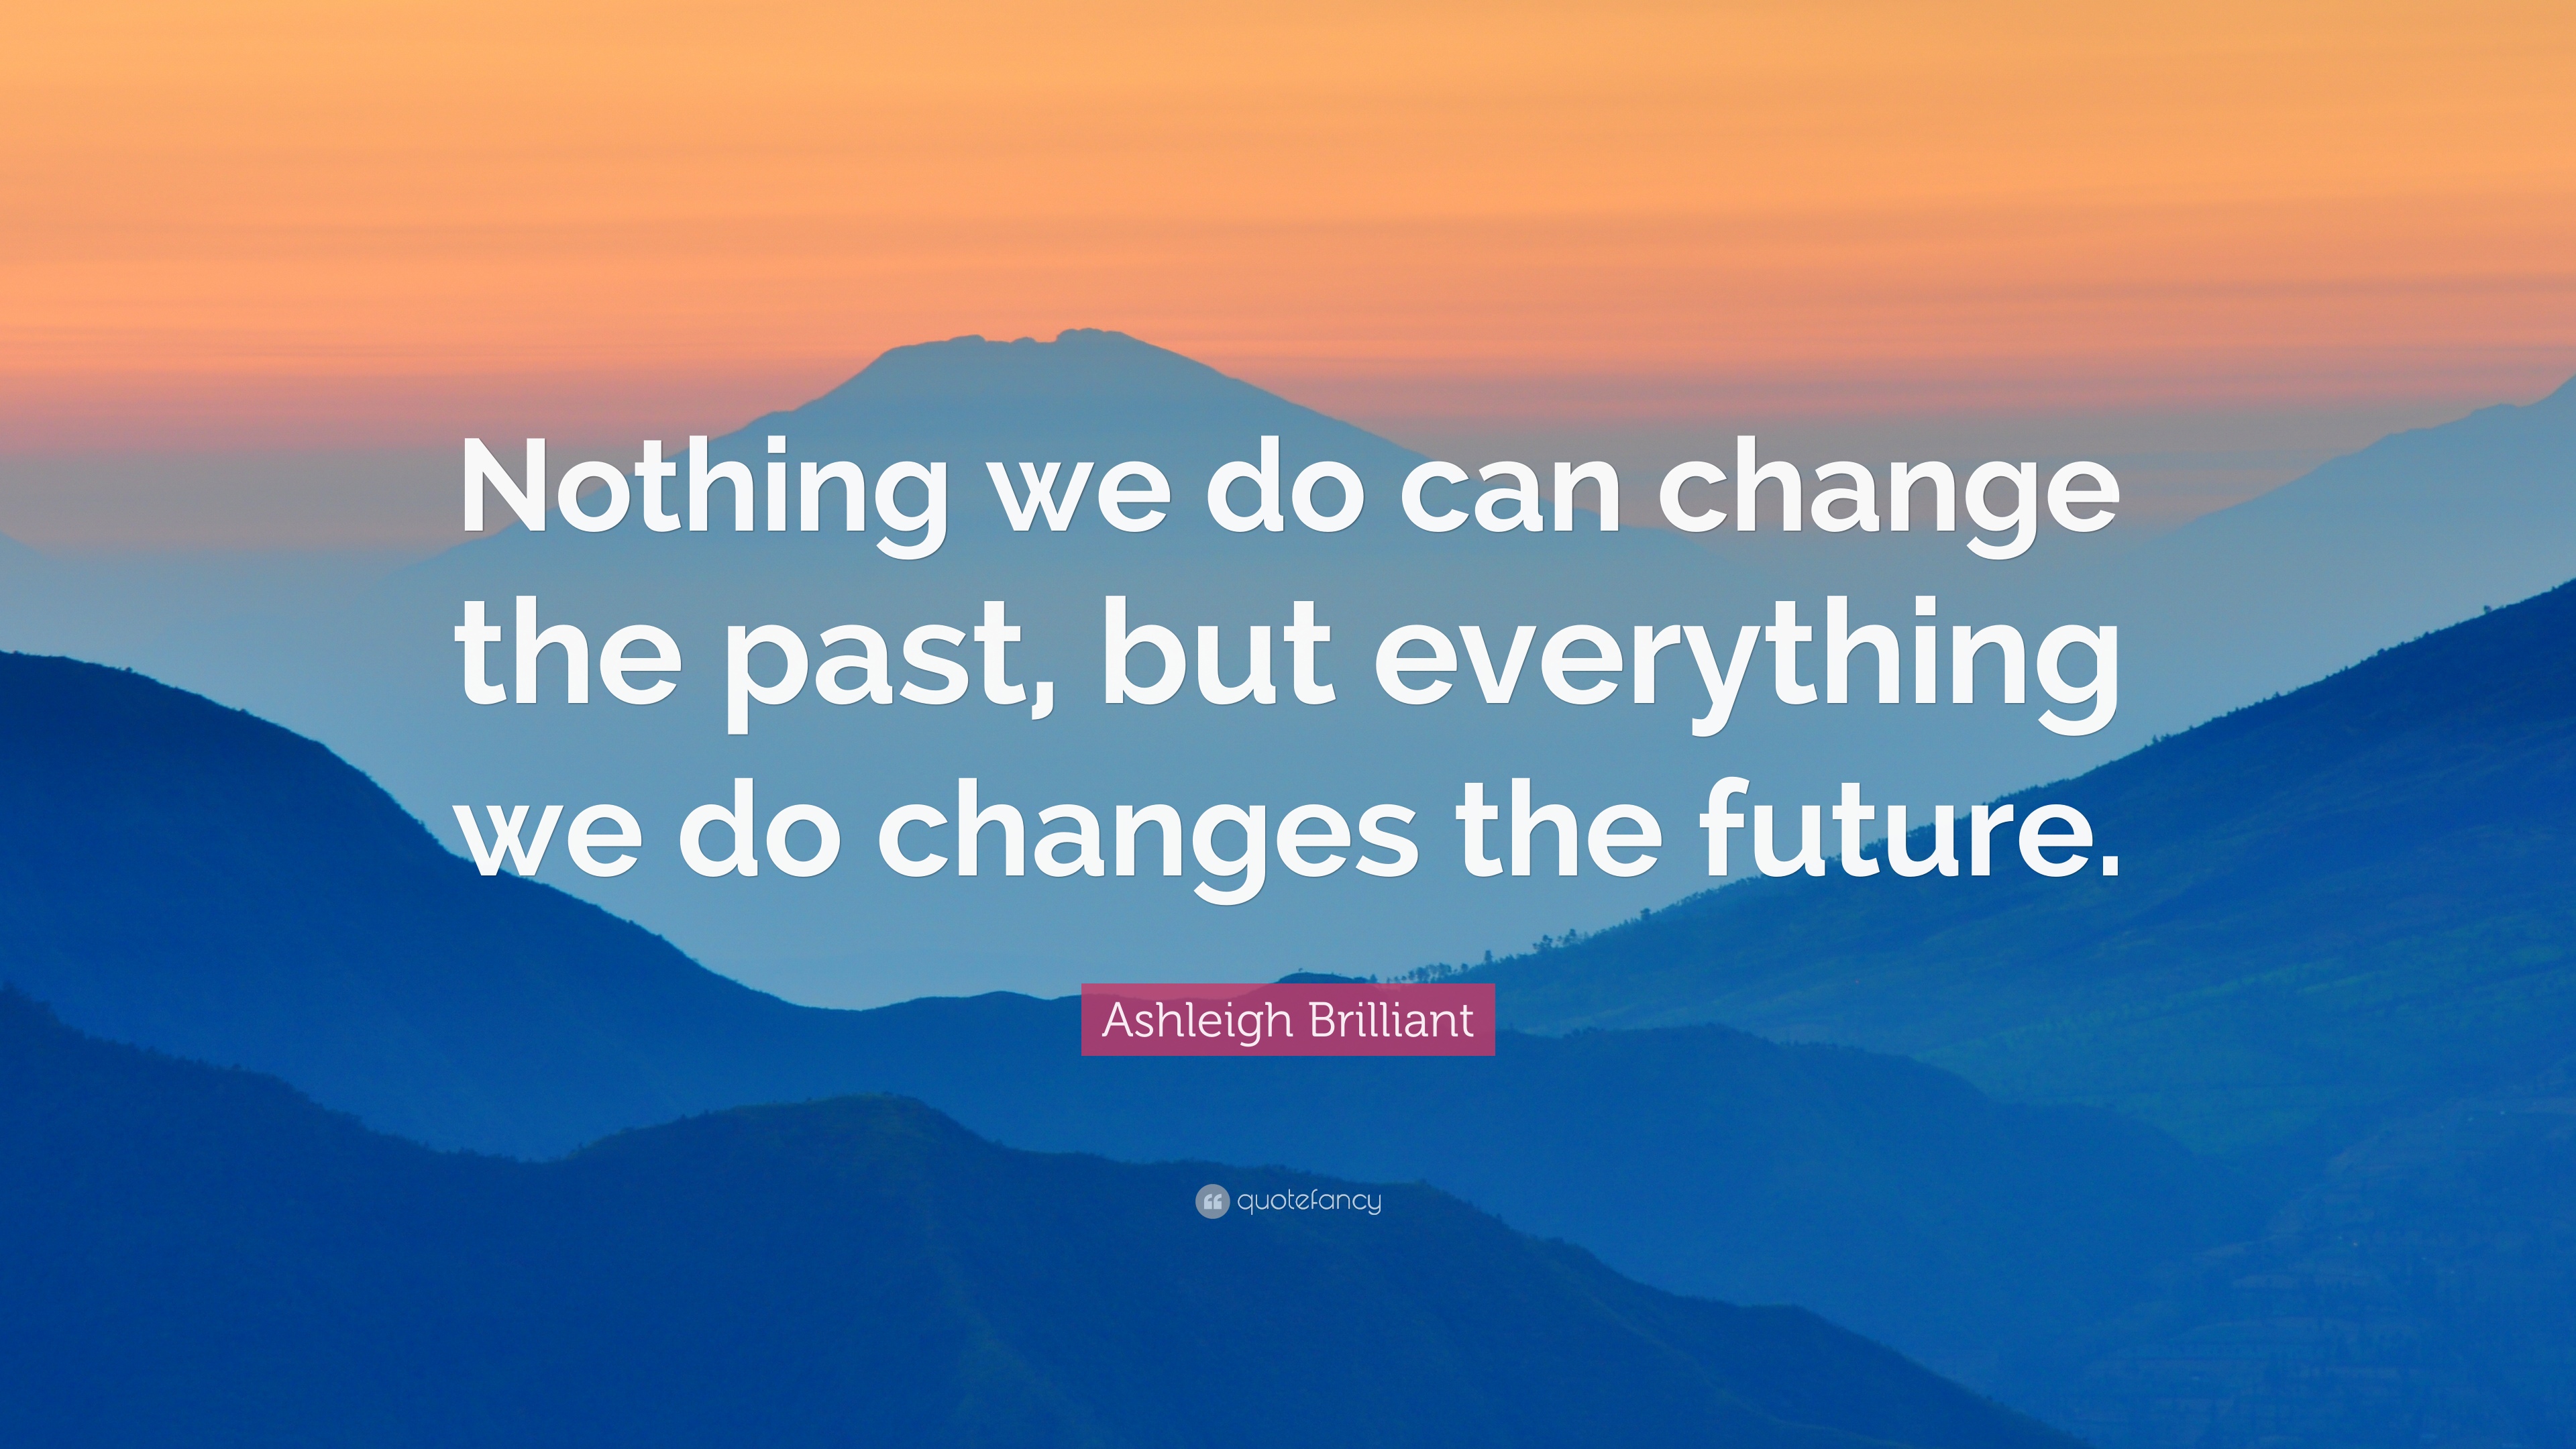 nothing we do can change the past, but everything we do changes the future. asheleigh brilliant